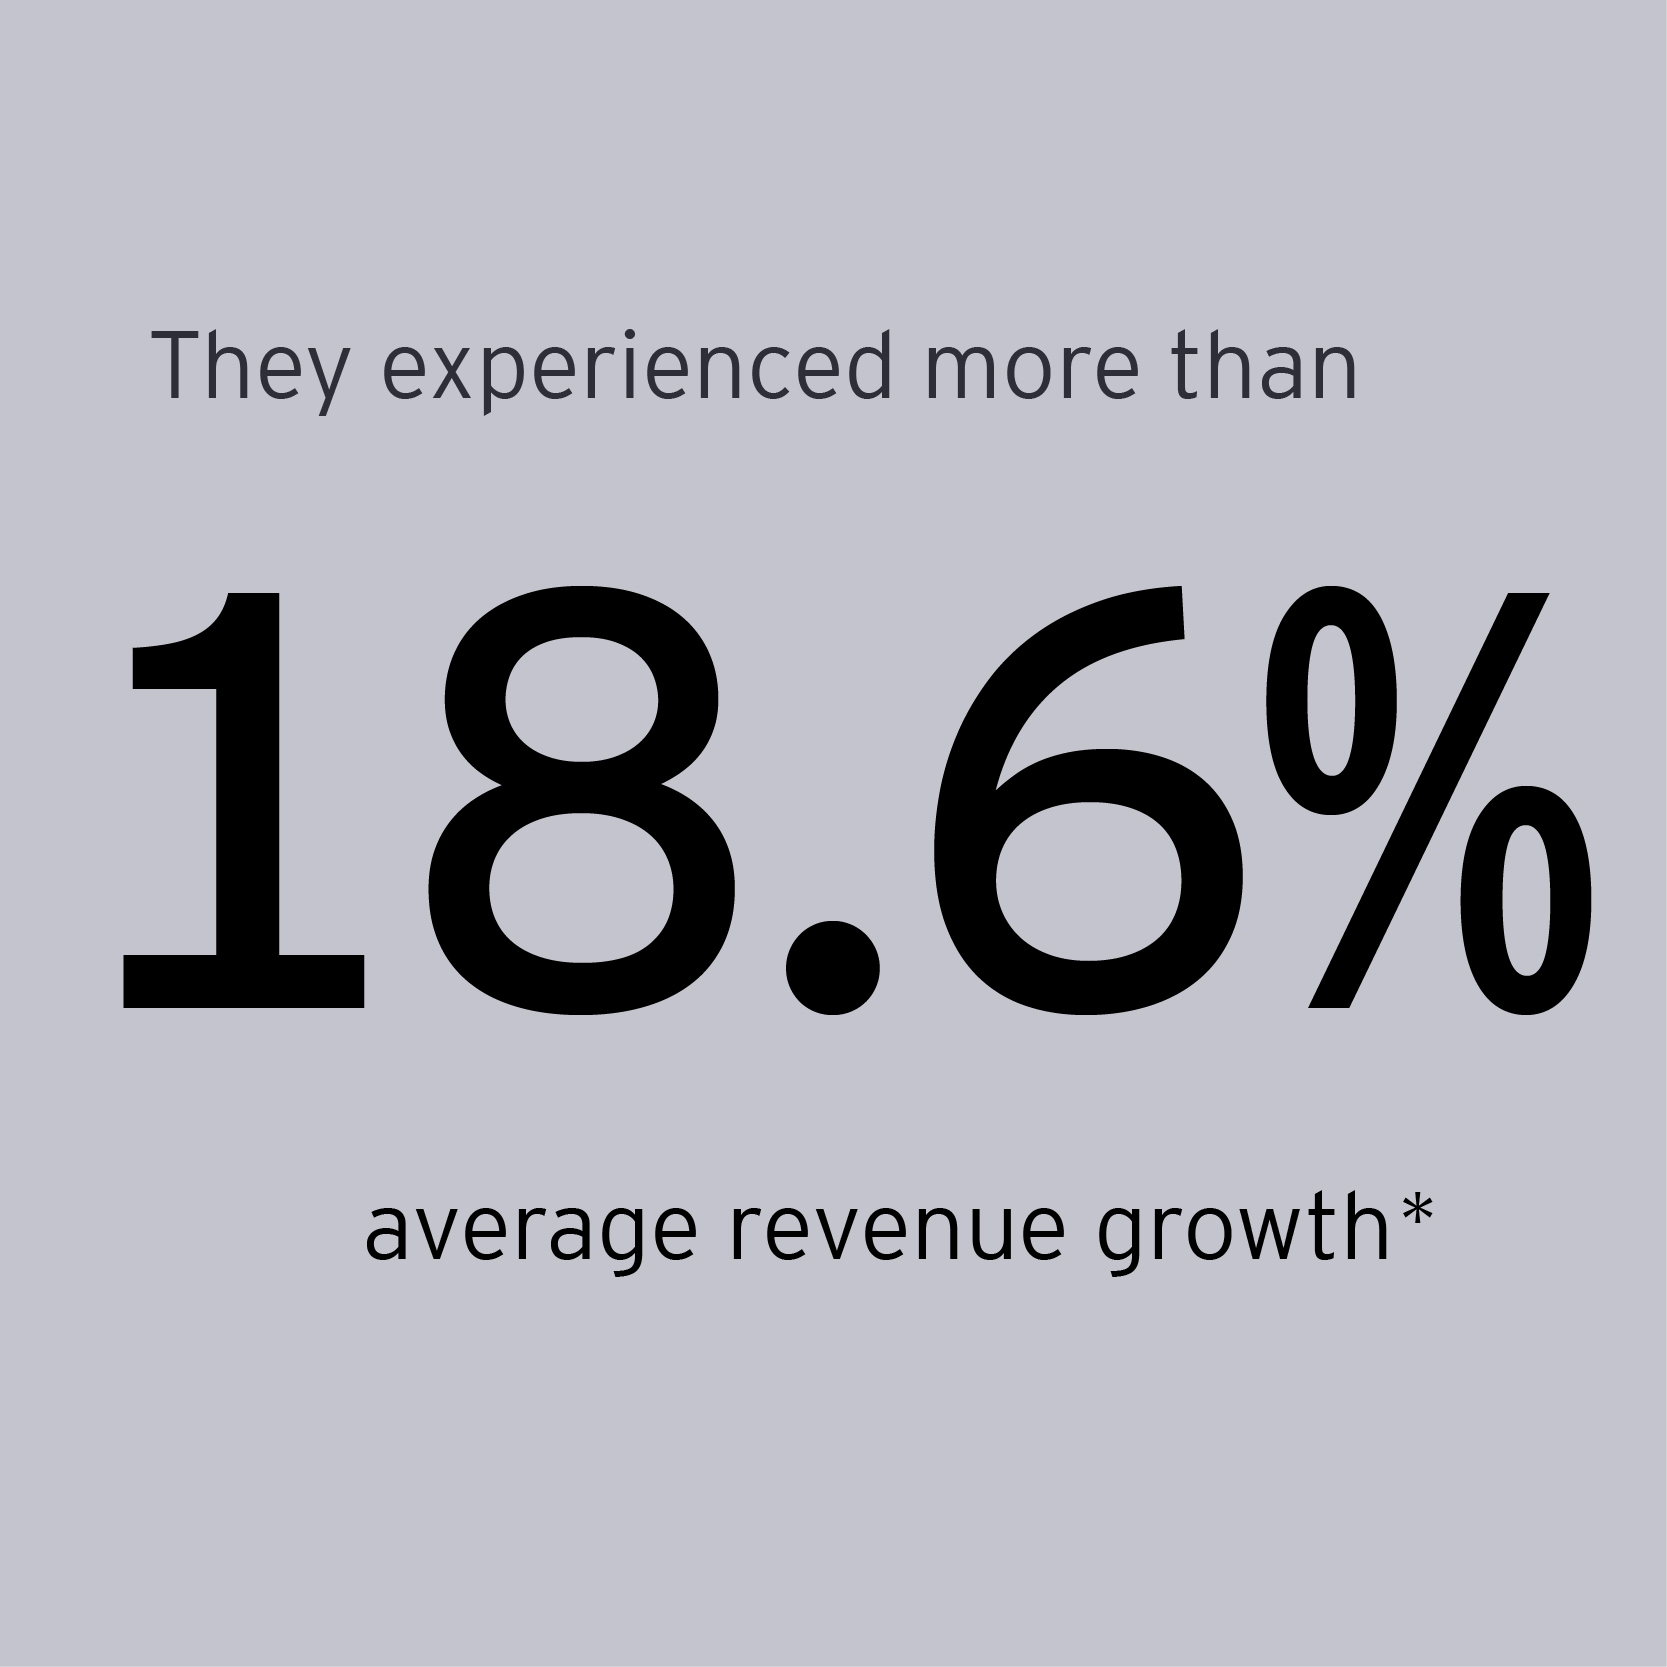 EOY Pacific Southwest finalists experienced more than 18.6% average revenue growth